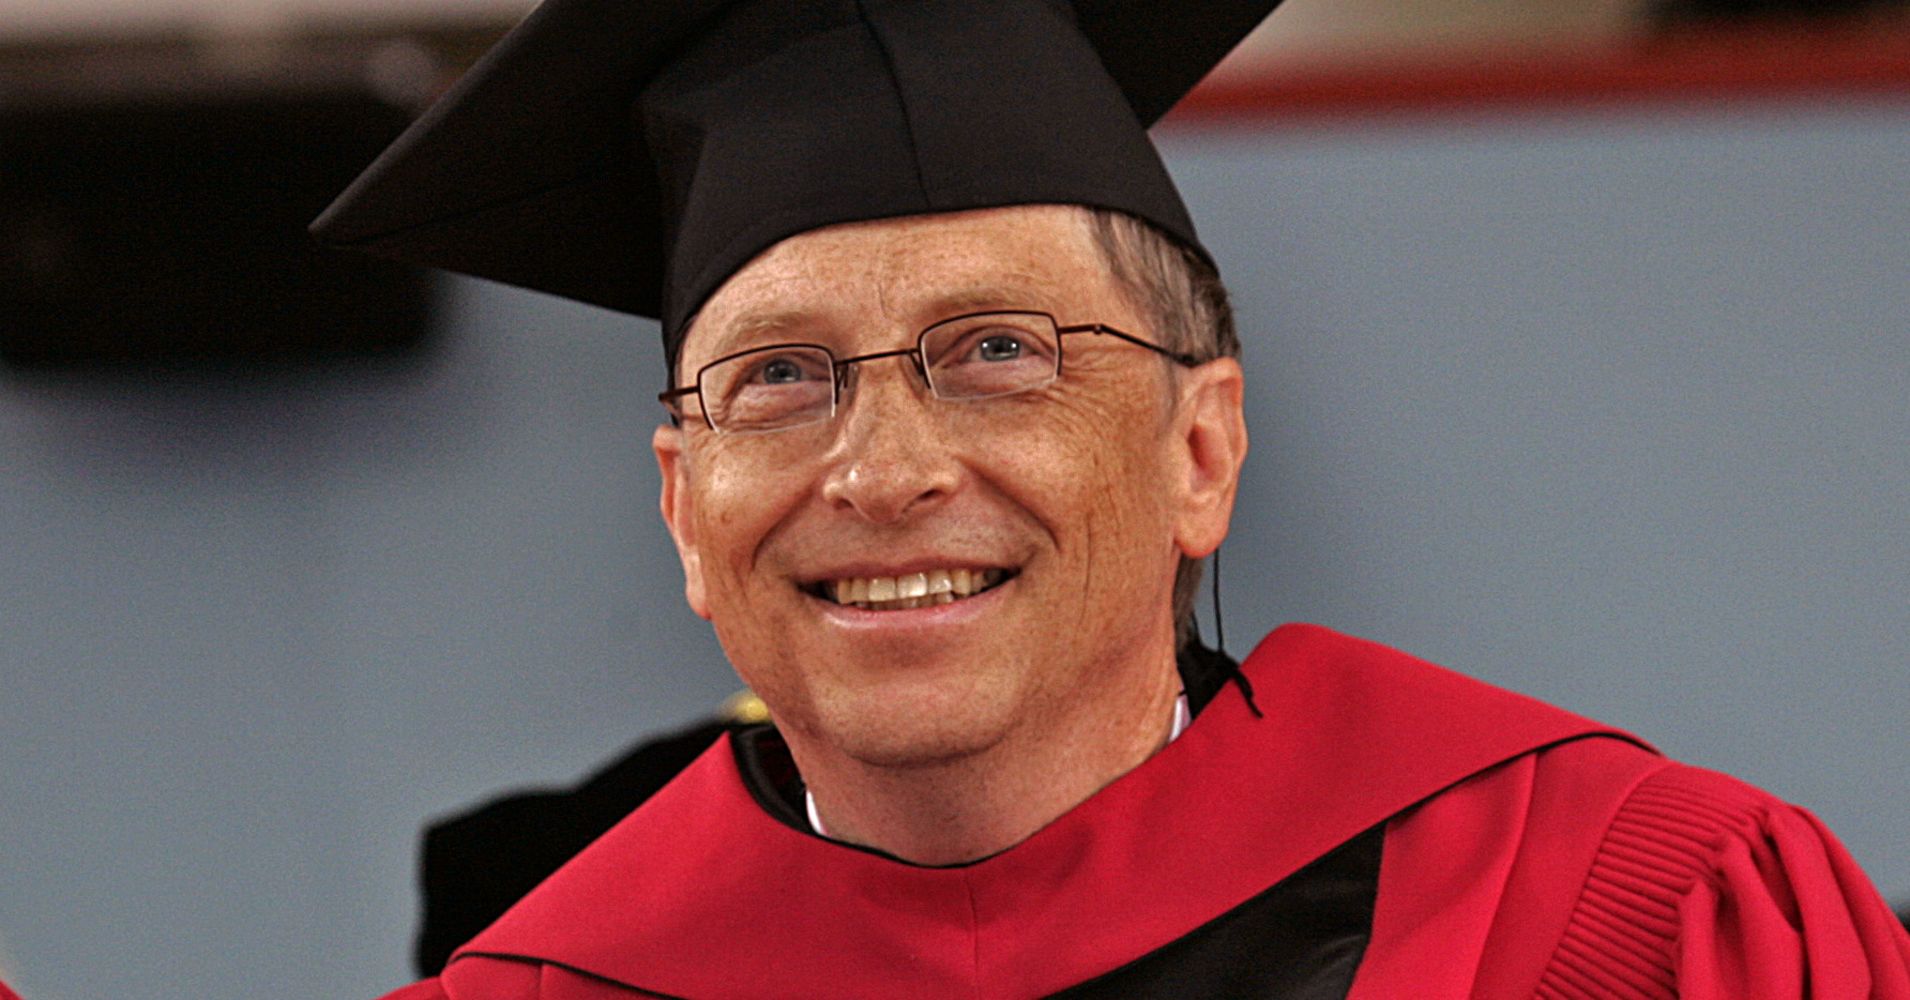 Bill Gates smiling at his Harvard Commencement speech